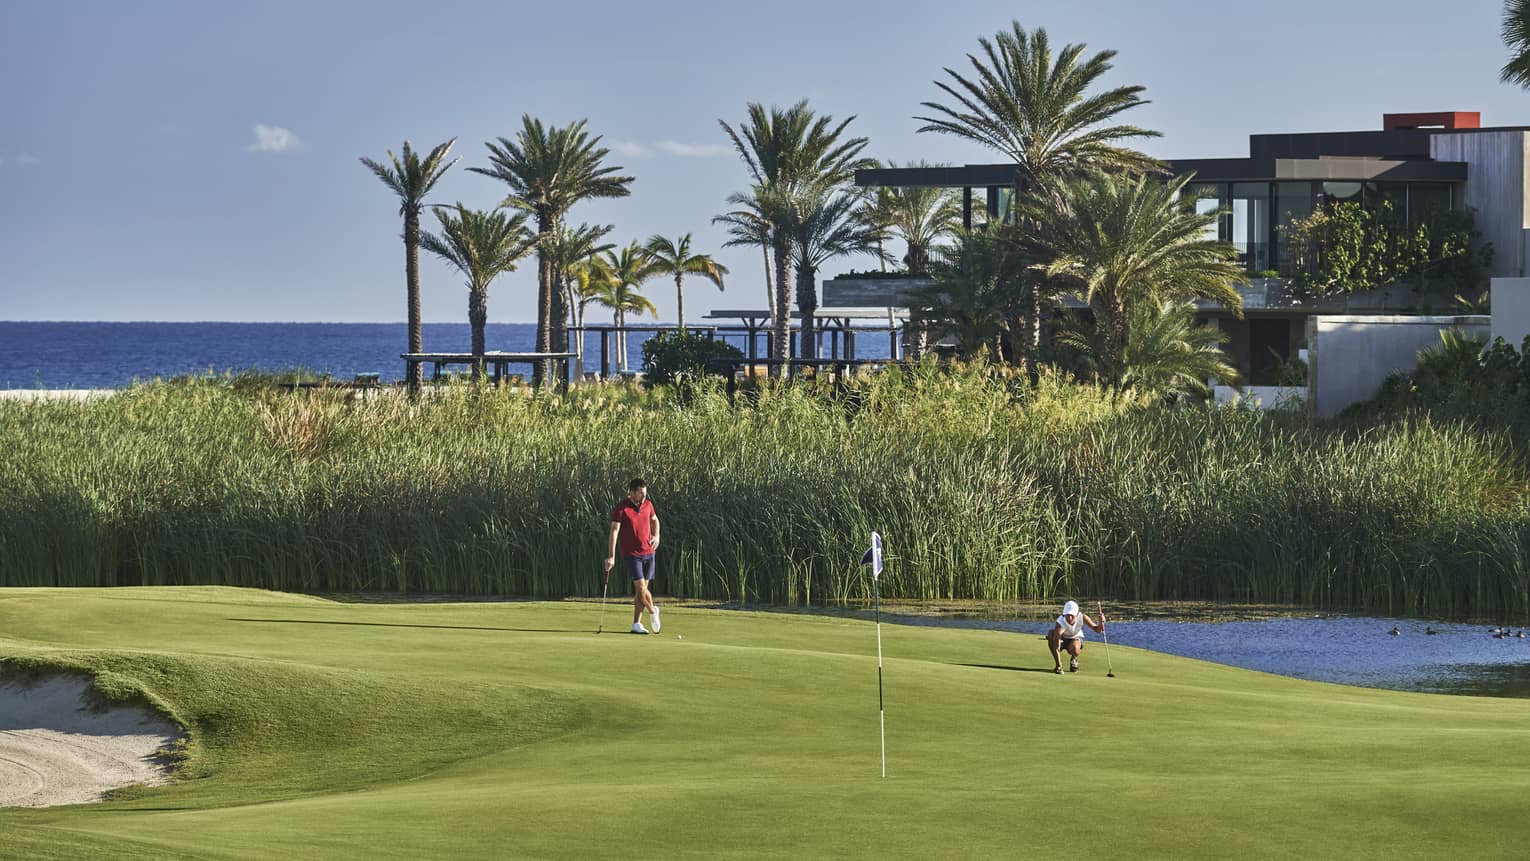 Two golfers enjoy a day on the golf course at four seasons Los Cabos with palm trees and the ocean in the background